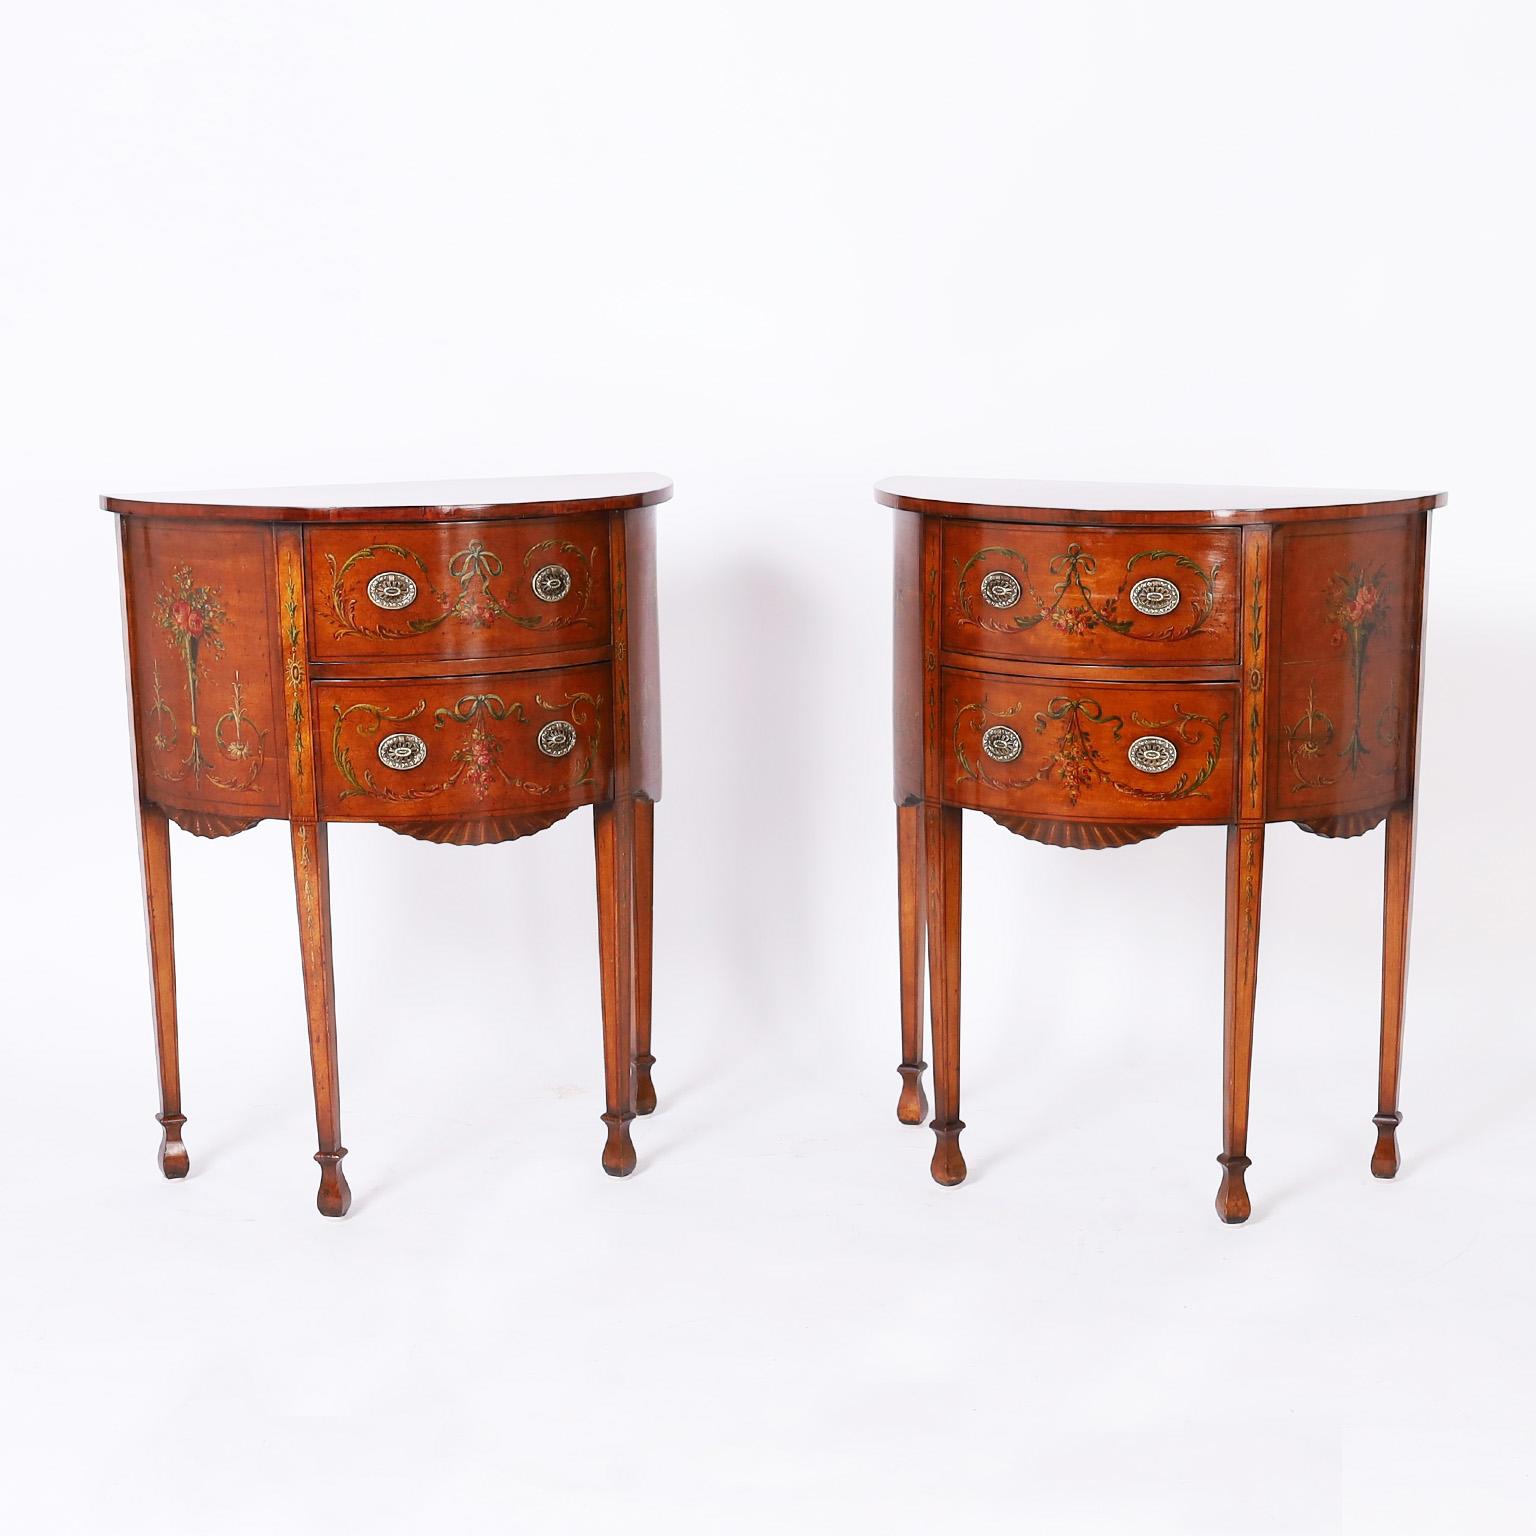 Antique pair of neoclassical stands crafted in mahogany with two drawers in a demi lune form decorated in Adam style romantic floral motifs over a faux crackled finish on long elegant legs. French polished in the traditional old world manner.